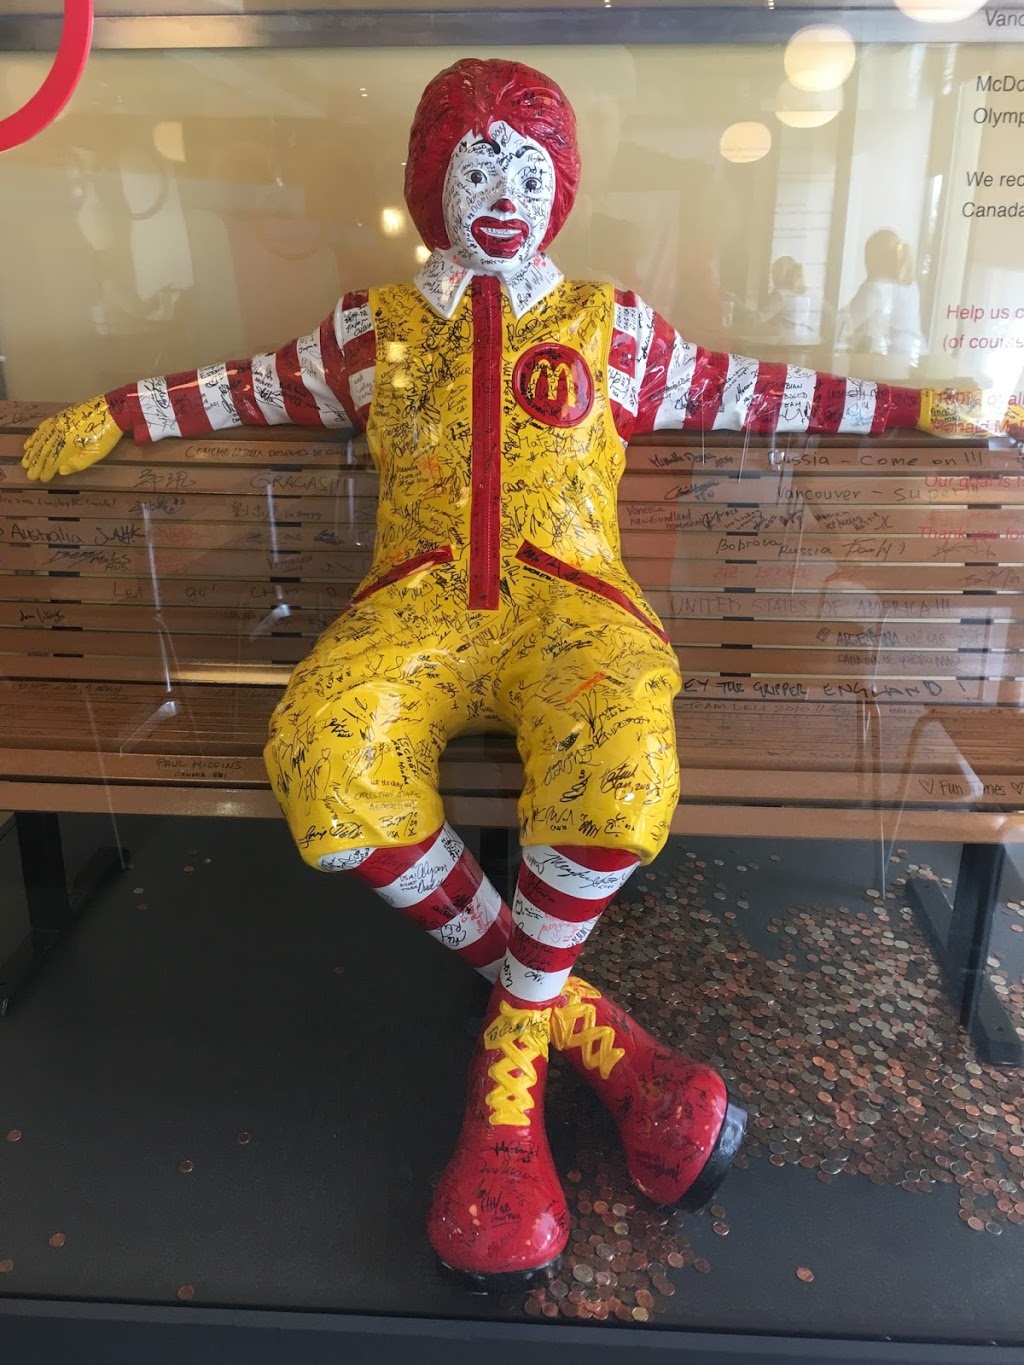 McDonalds - Corporate Office | cafe | 1 McDonalds Place, Toronto, ON M3C 3L4, Canada | 4164431000 OR +1 416-443-1000